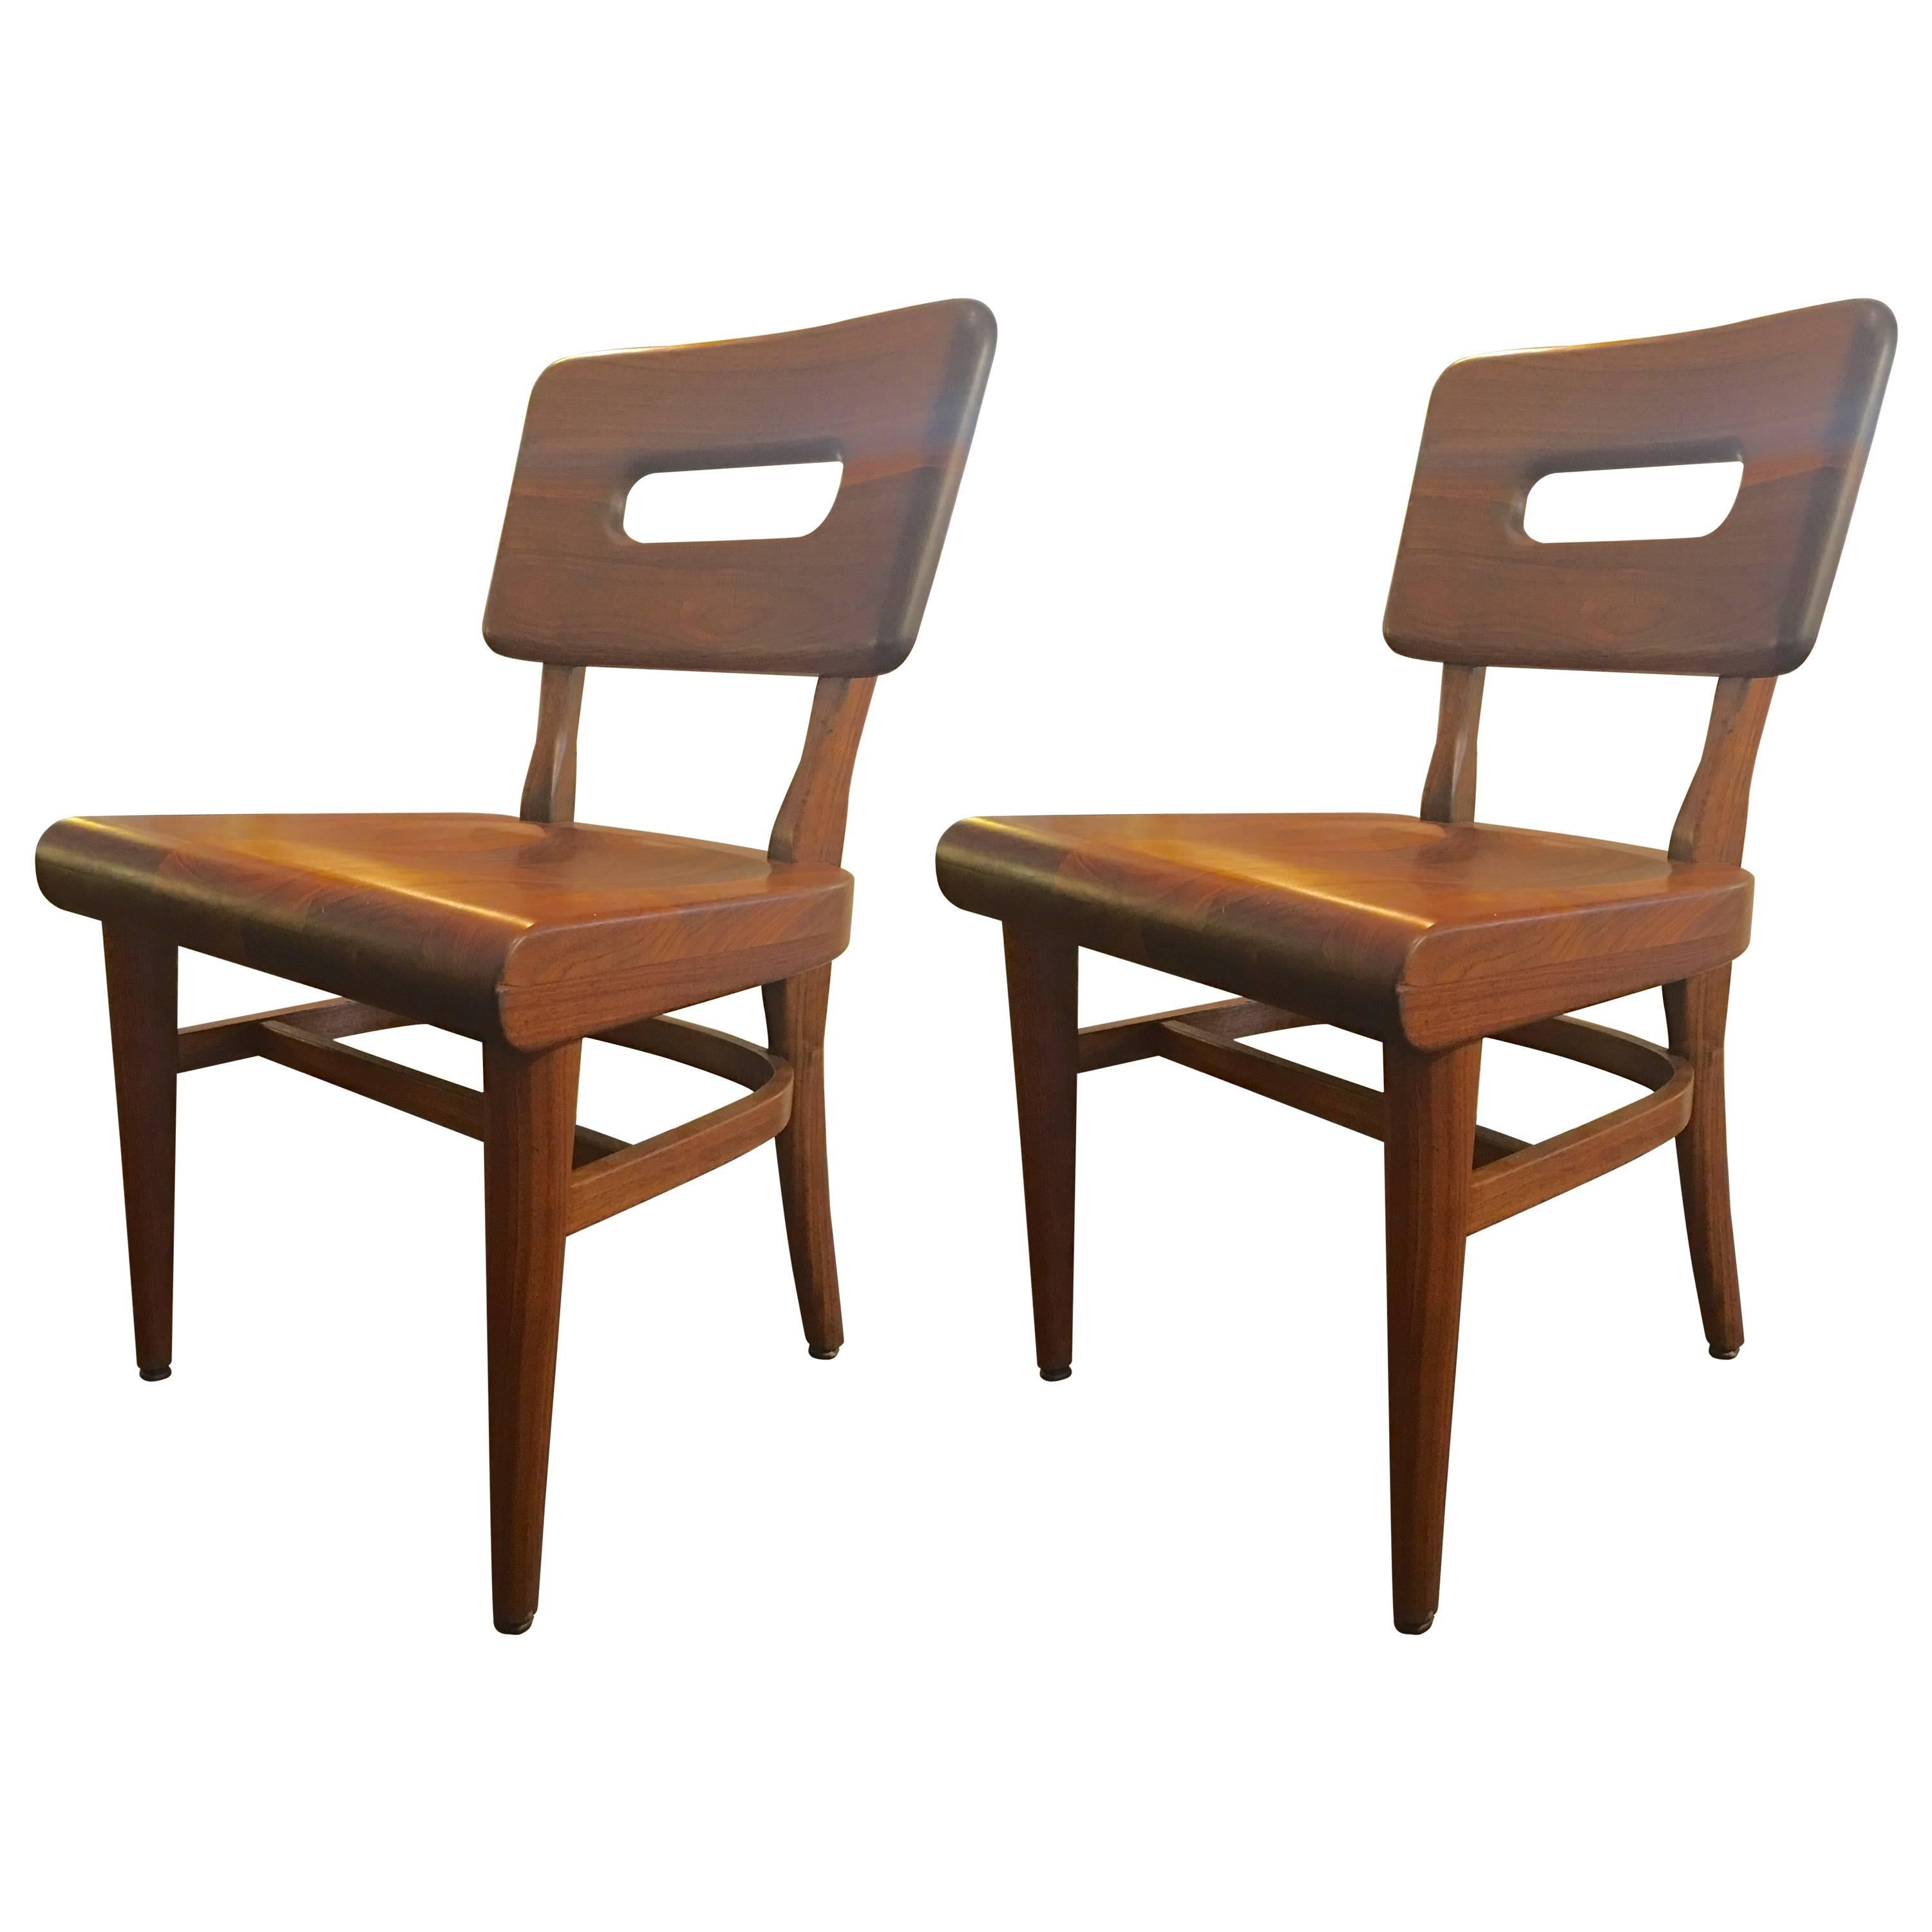 Pair of Wood Chairs by W H Gunlocke For Sale